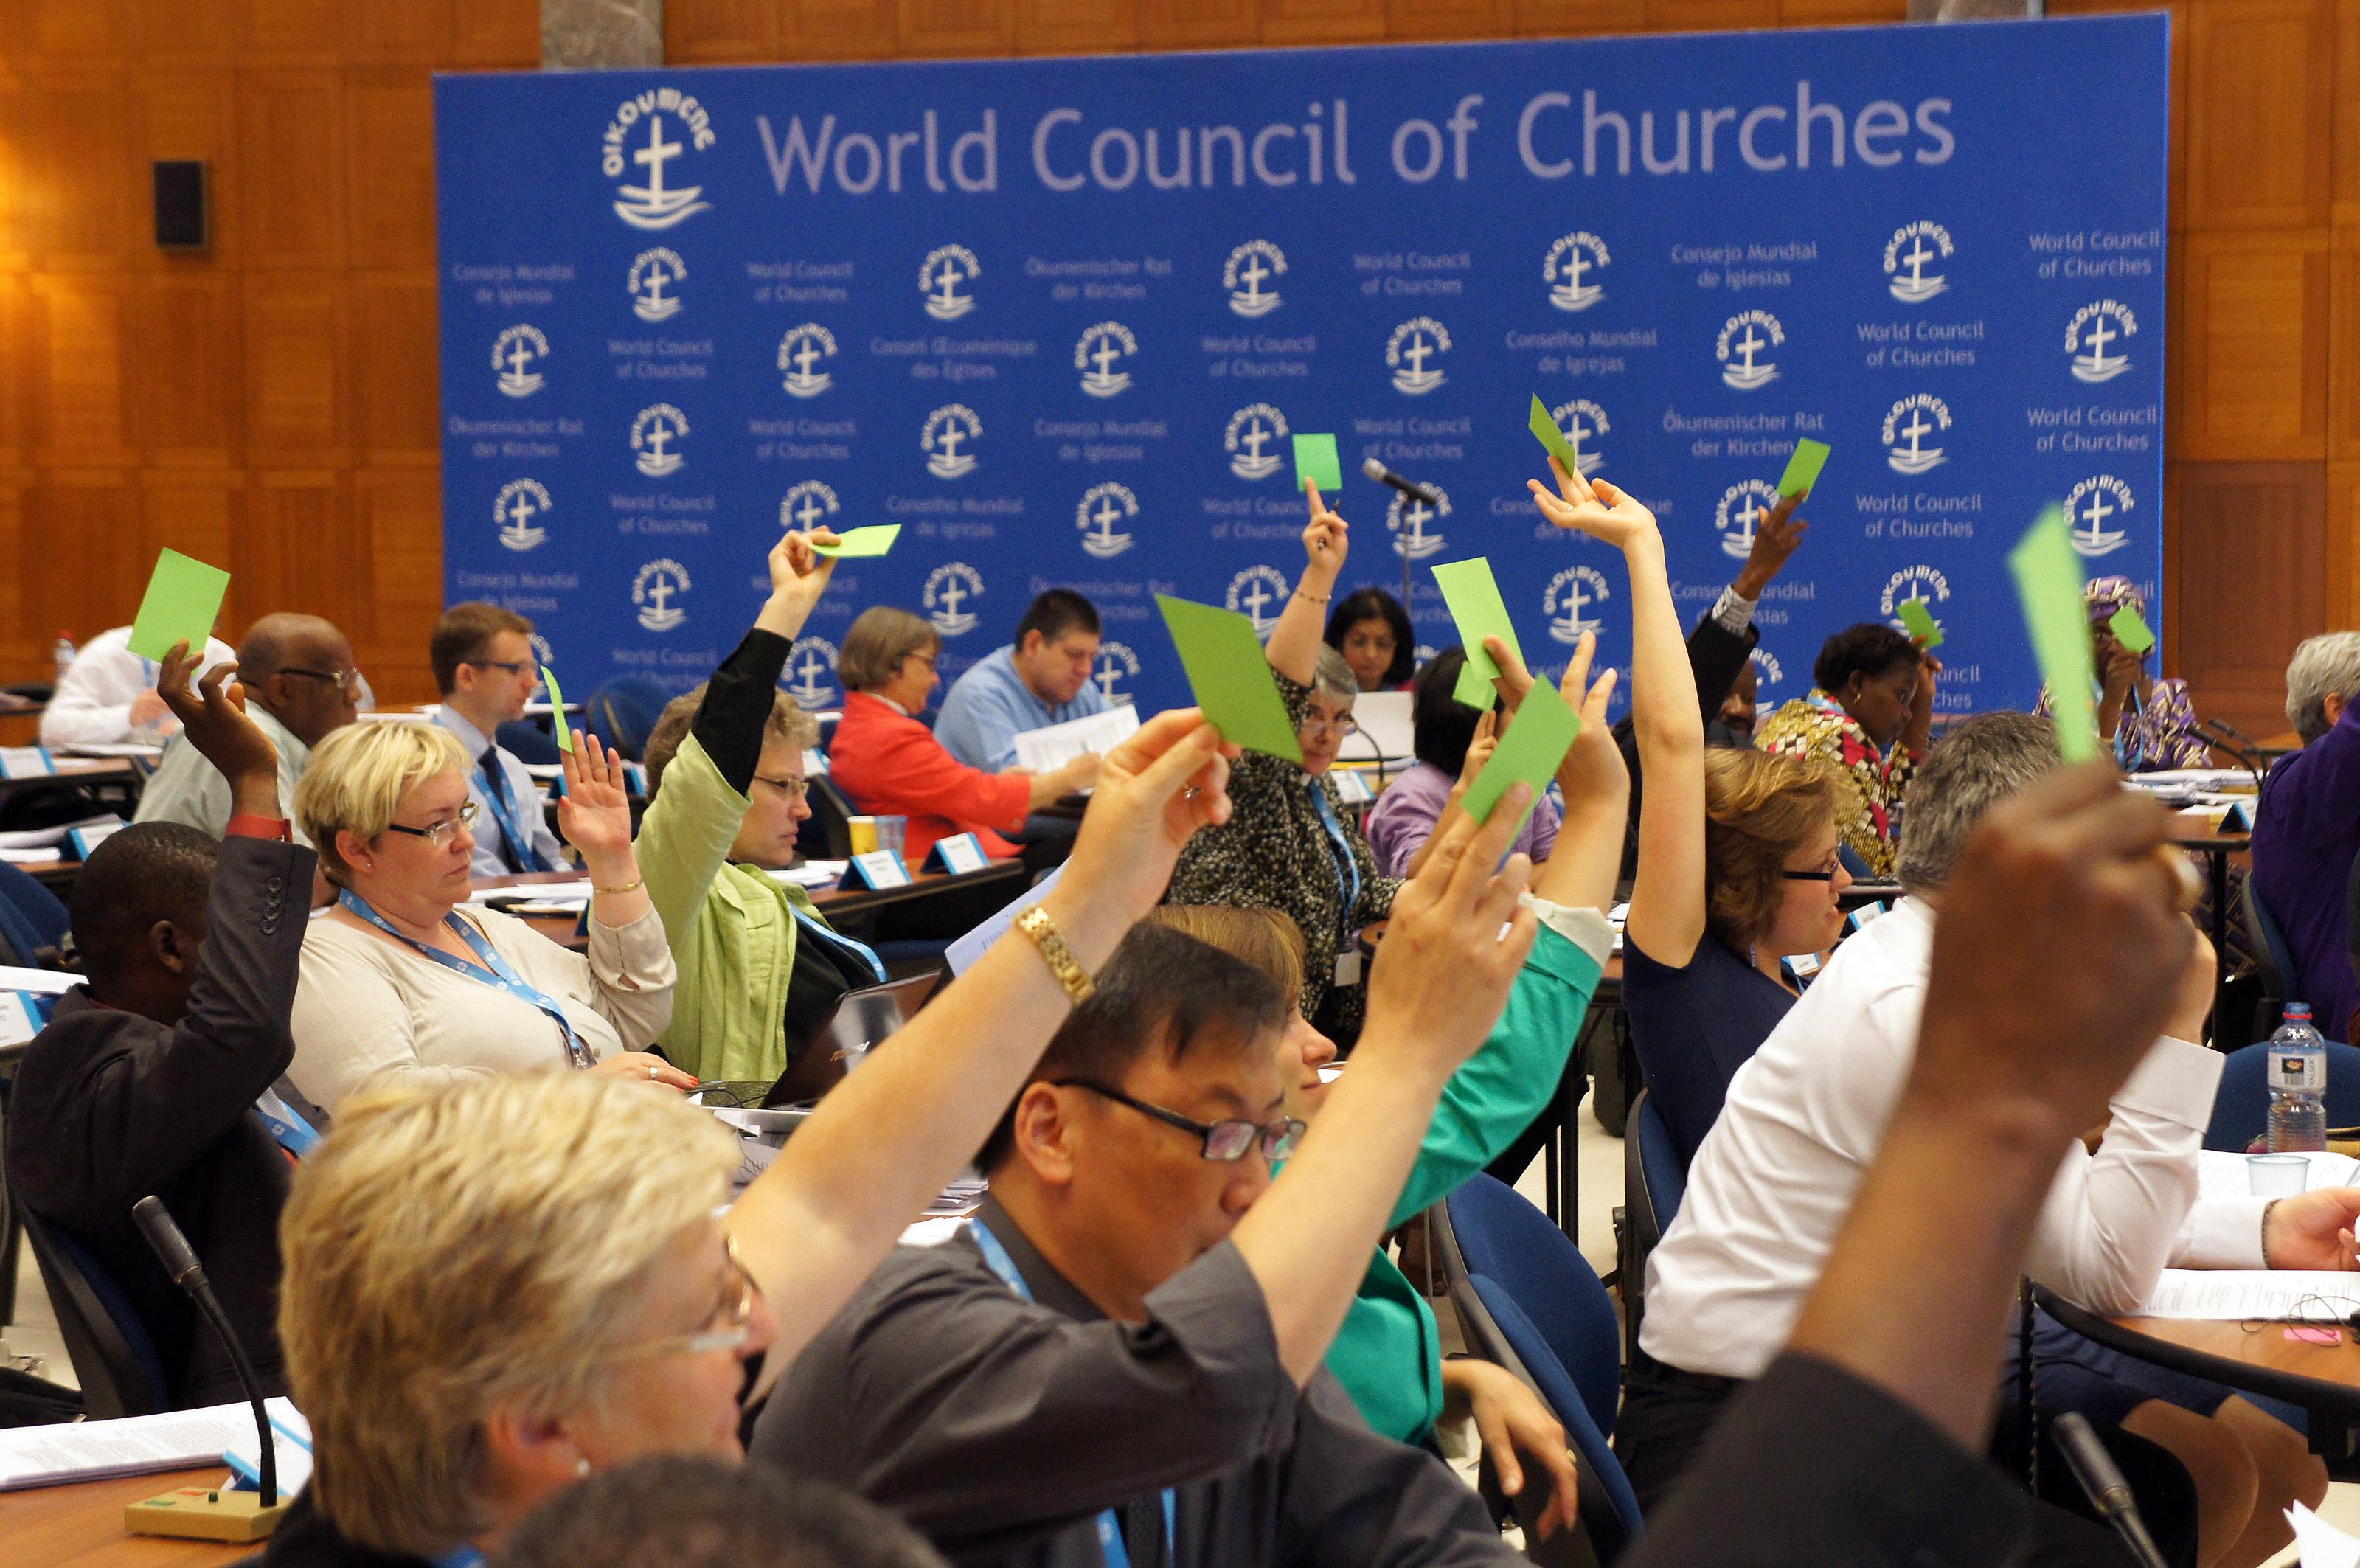 Council members vote on a recommendation. Â© LWF/S. Gallay